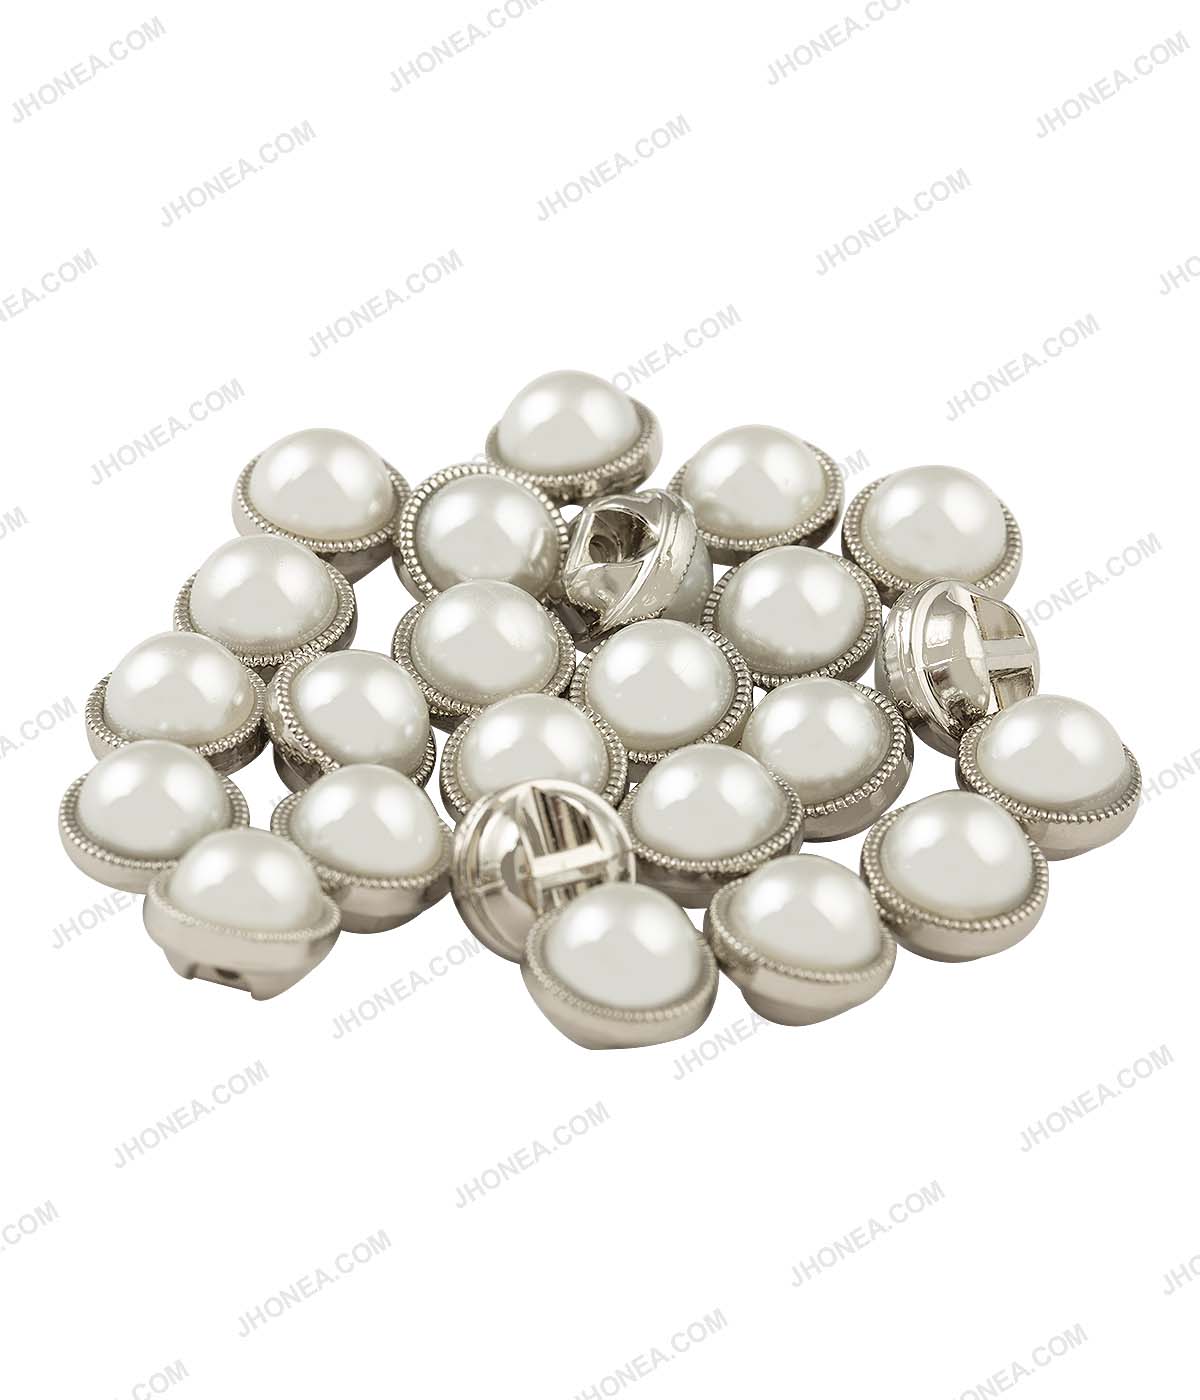 Shiny Silver Accent Border Dome Pearl Buttons